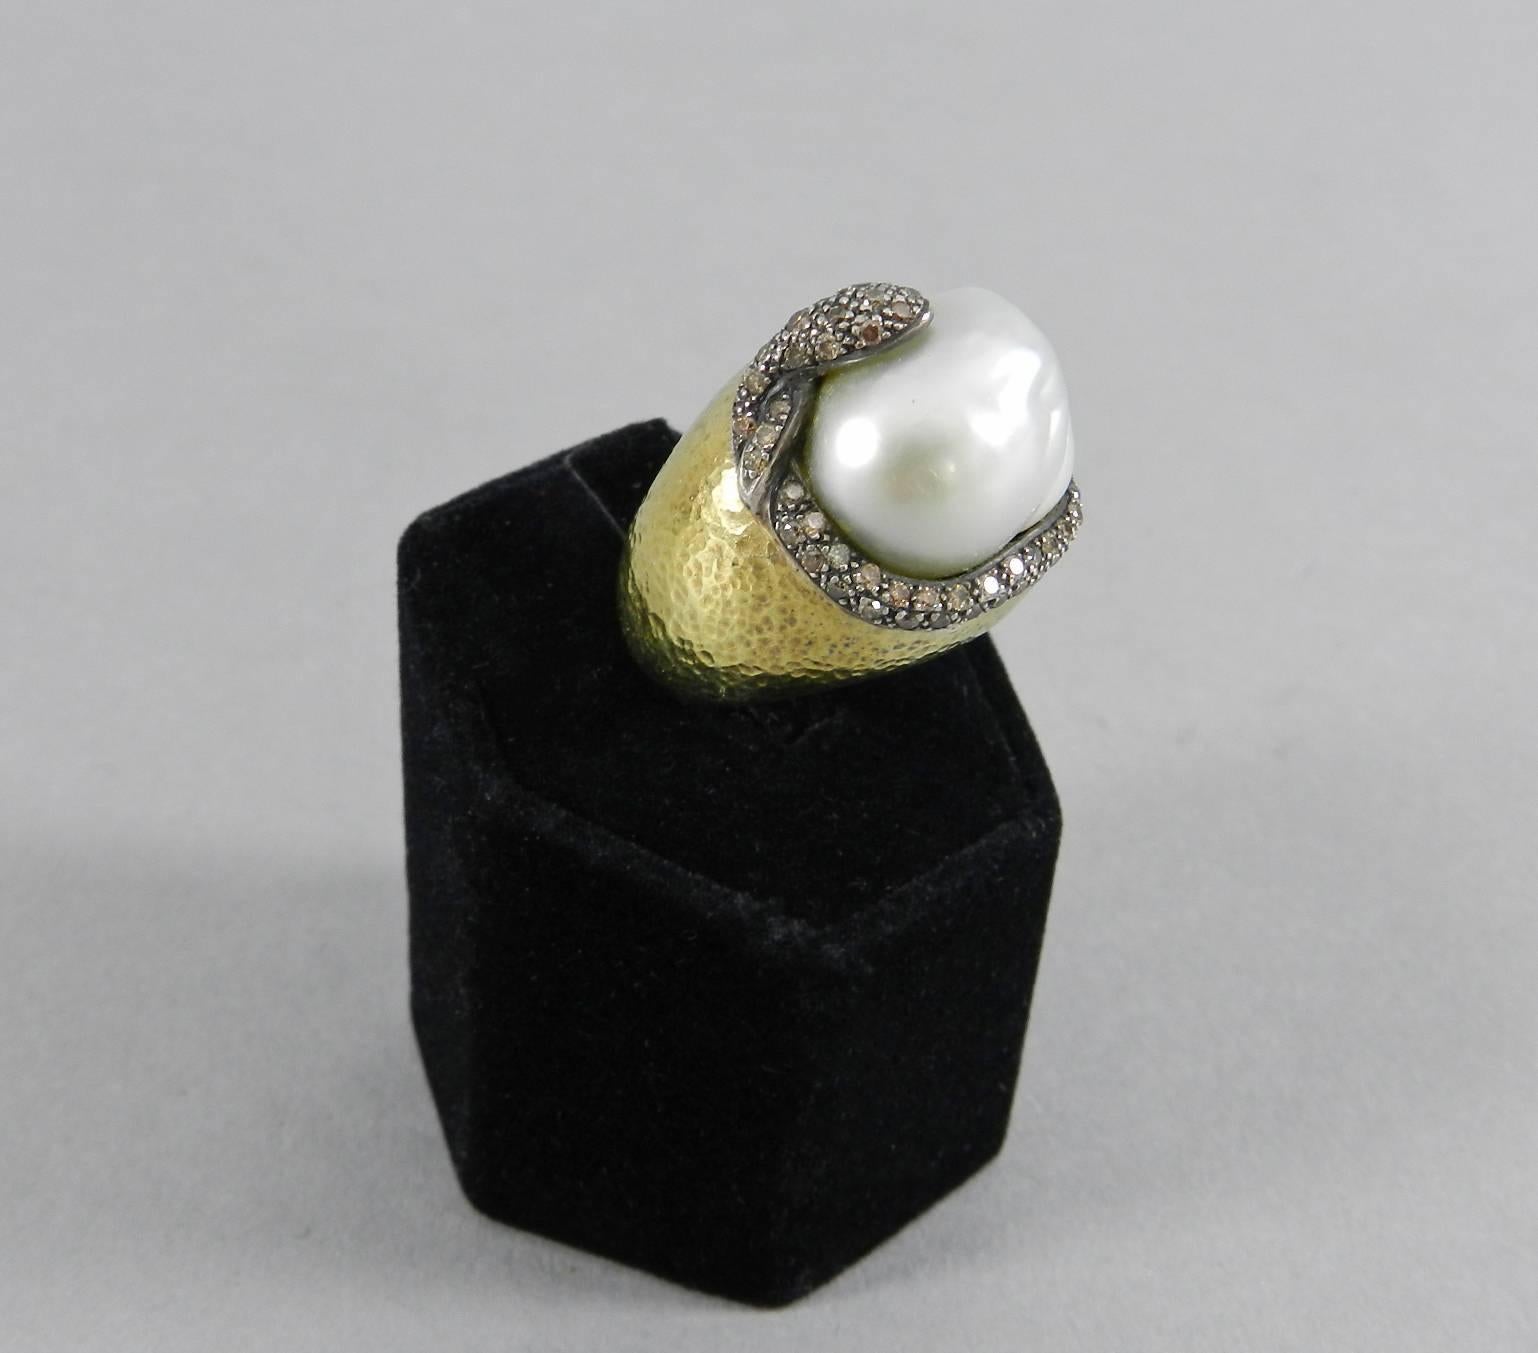 Bold 18k yellow gold cocktail ring with diamond snake wrapped around a baroque south sea pearl centre.  Blackened silver snake set with 75 brown pave diamonds.  Large baroque south sea pearl measures about 17 x 15 x 8mm.  Approximately 1.25 ctw